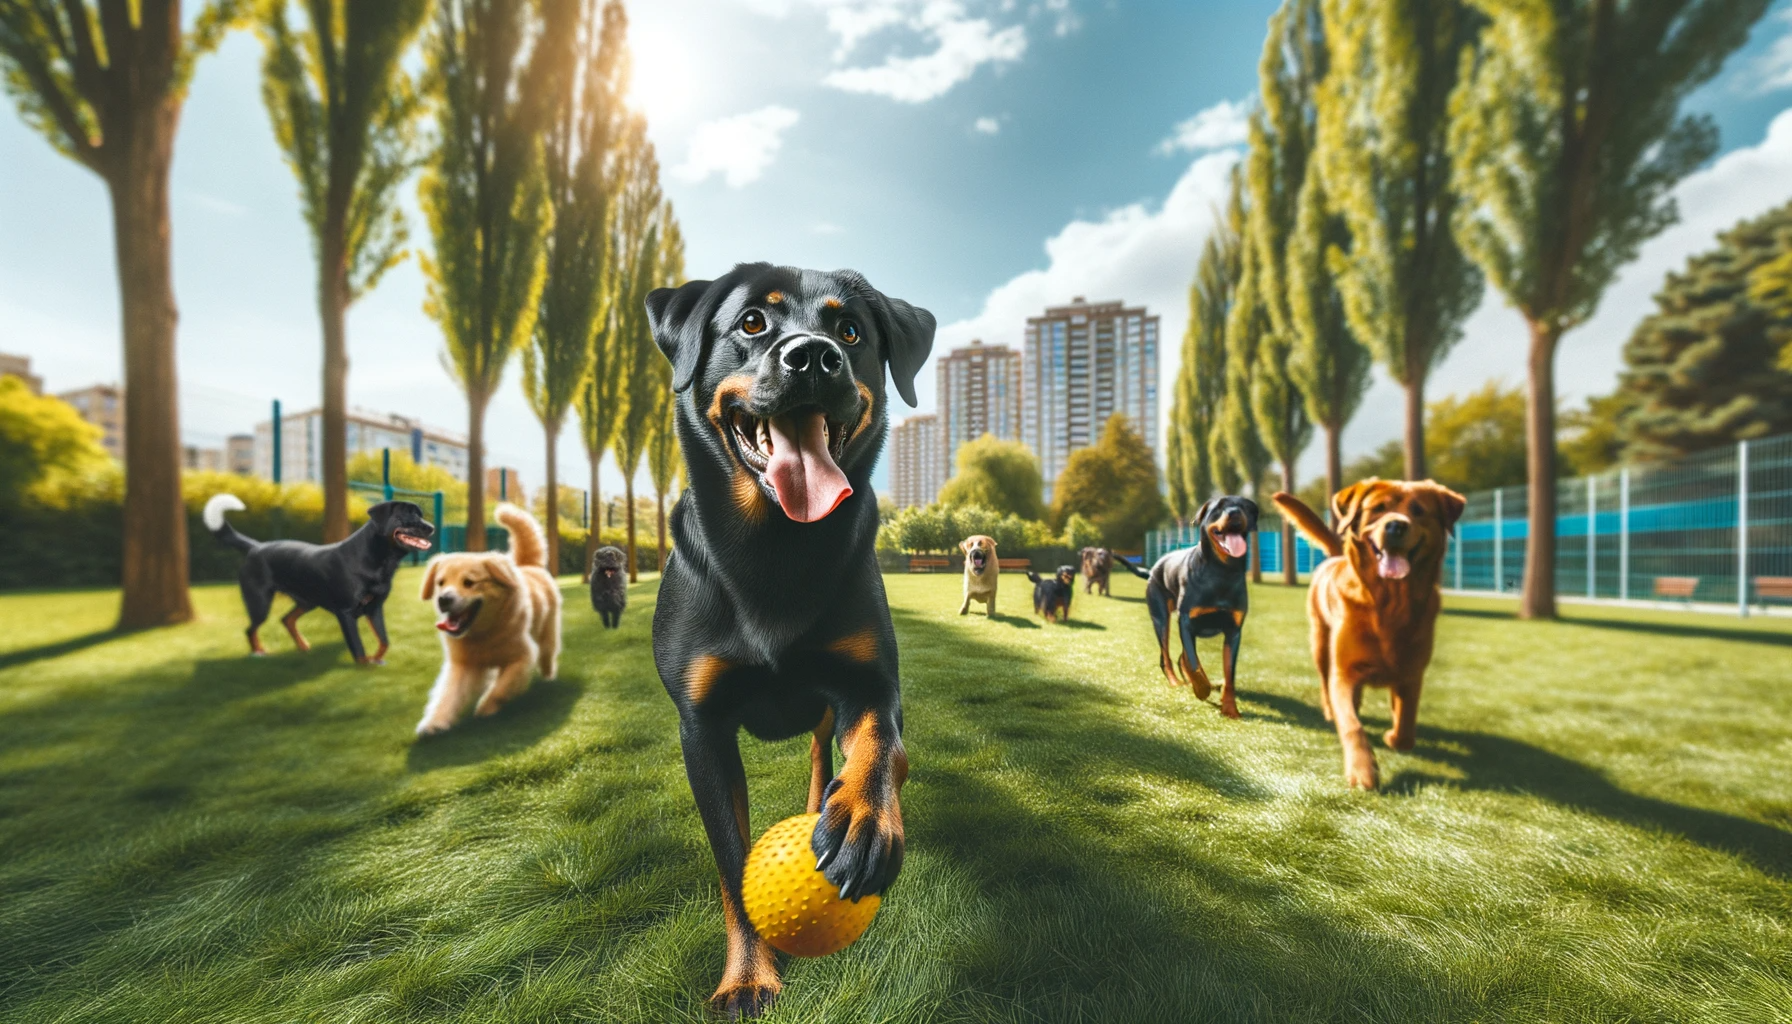 A Labrador mixed with Rottweiler joyfully playing fetch with other dogs at a park, showing the importance of proper socialization